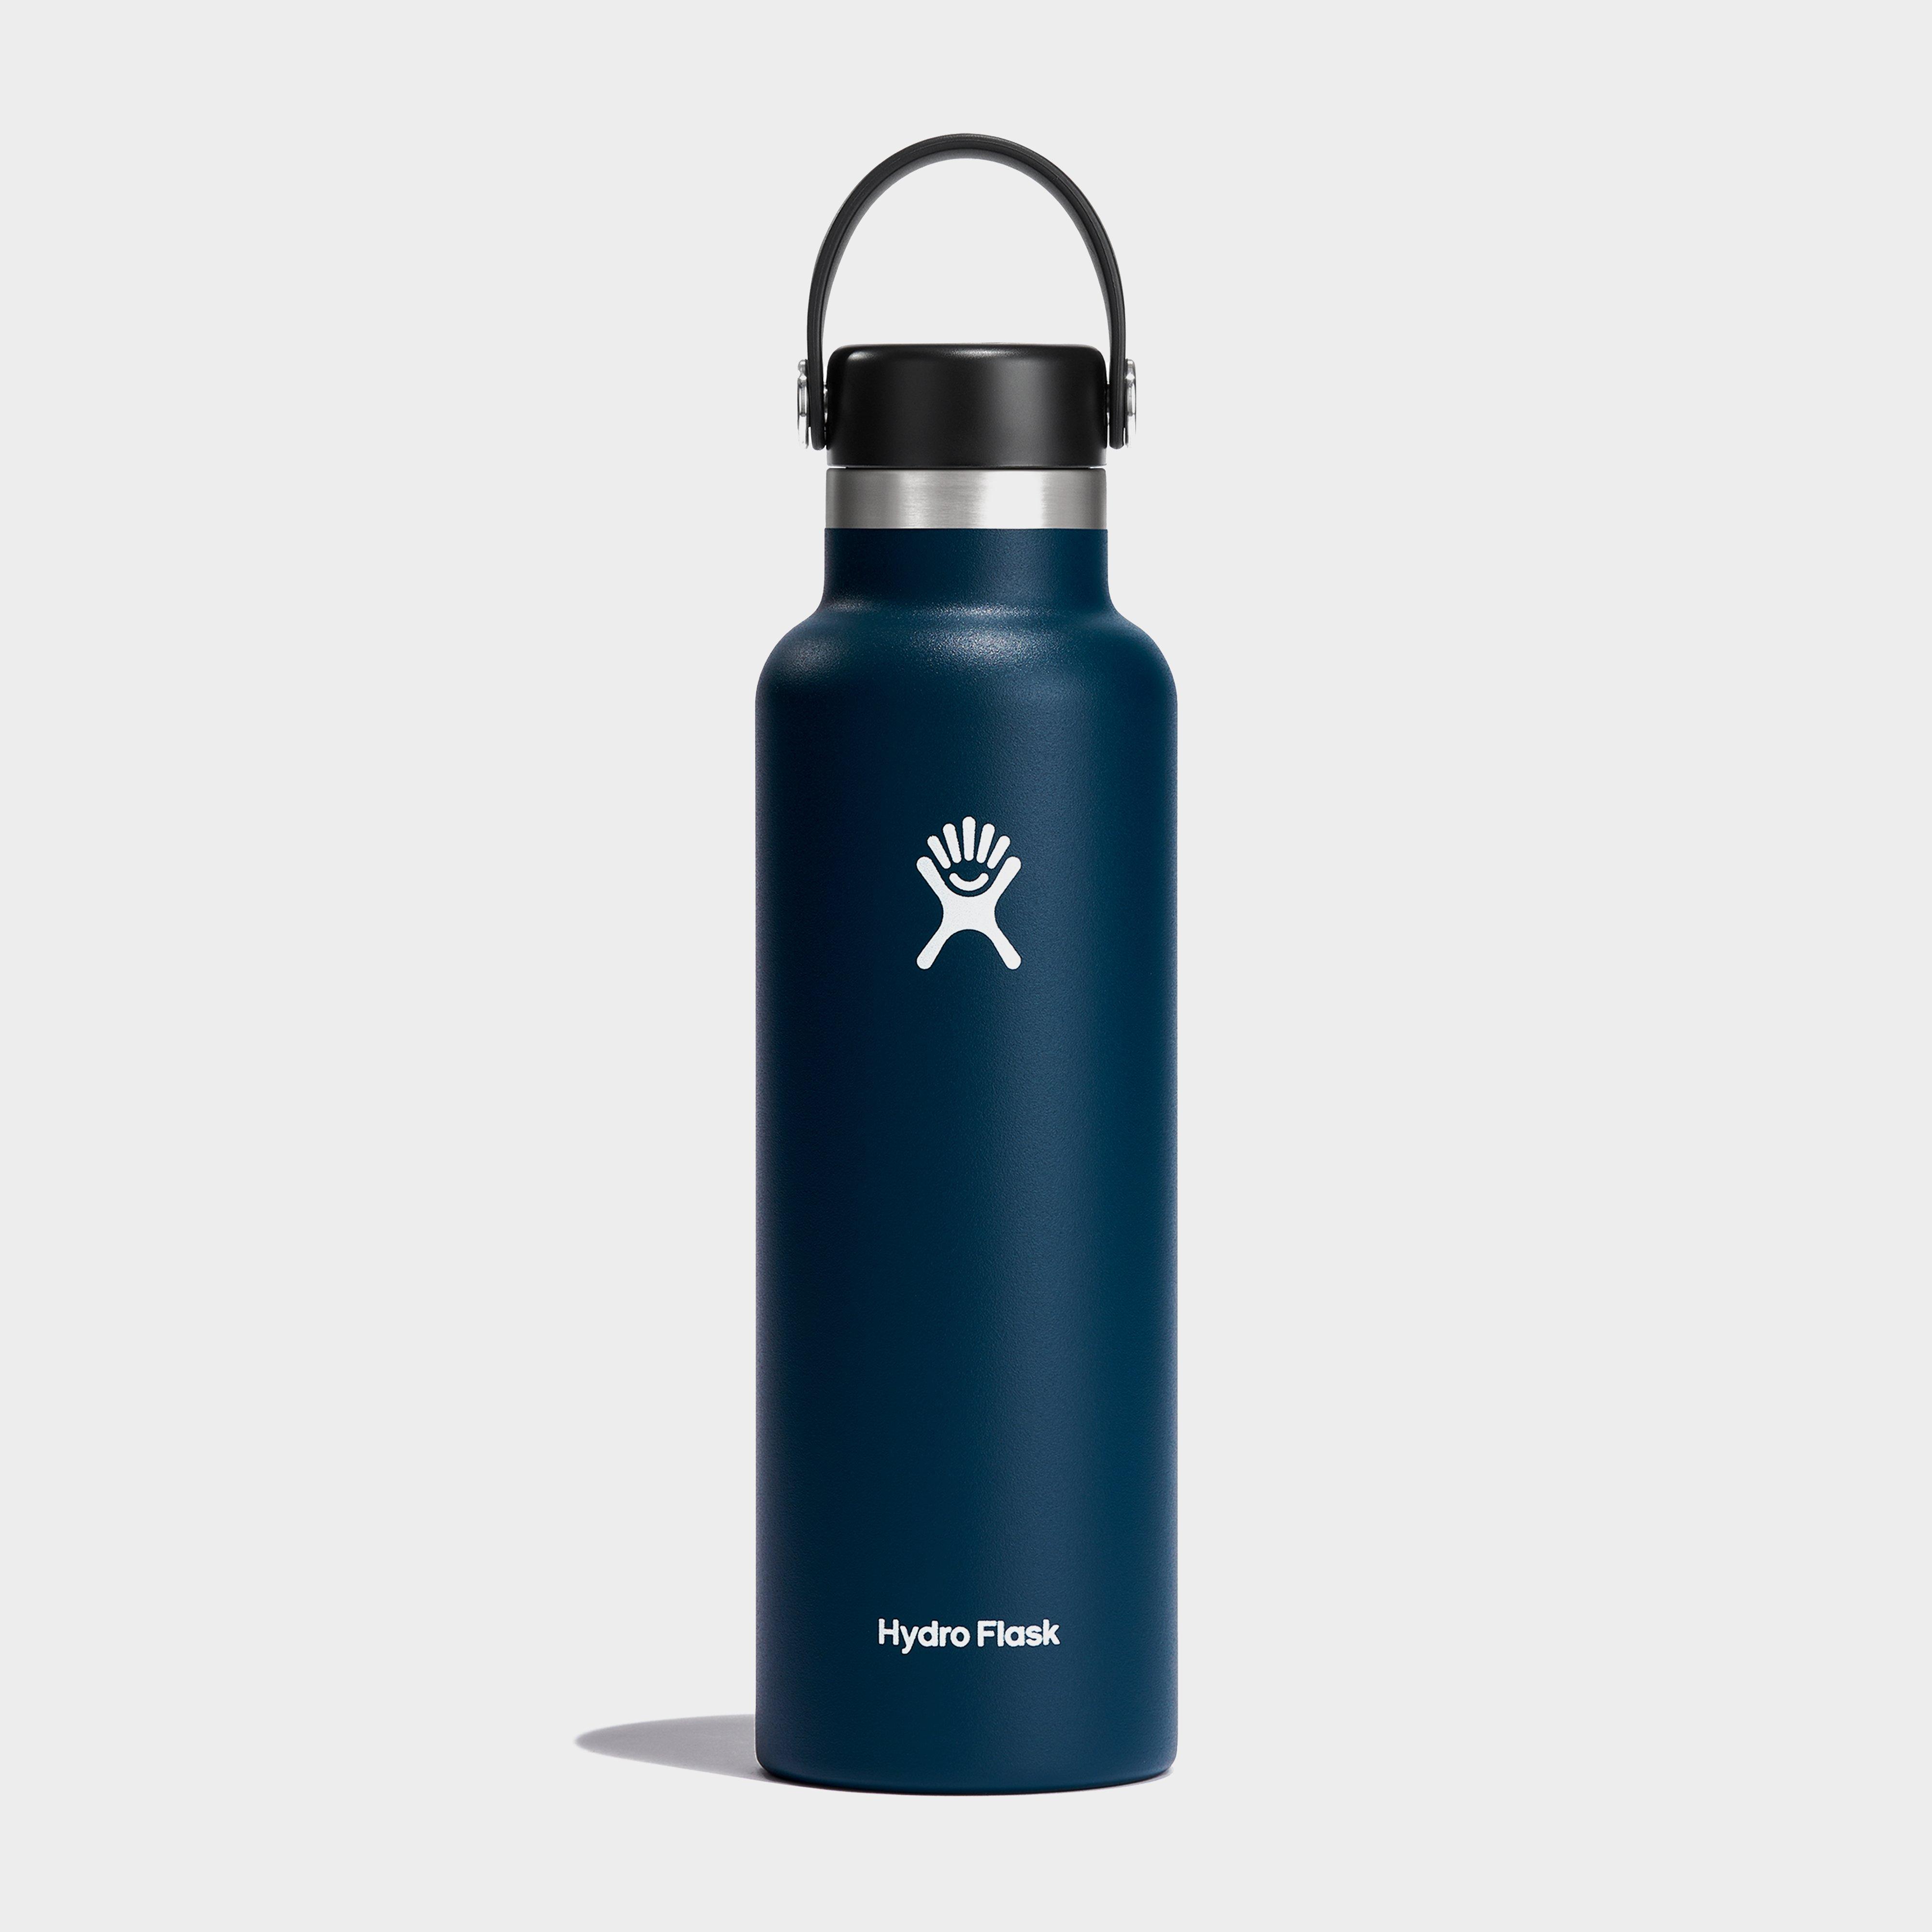 Hydro Flask 21 Oz (621 Ml) Standard Mouth Hydro Flask - Nvy, NVY